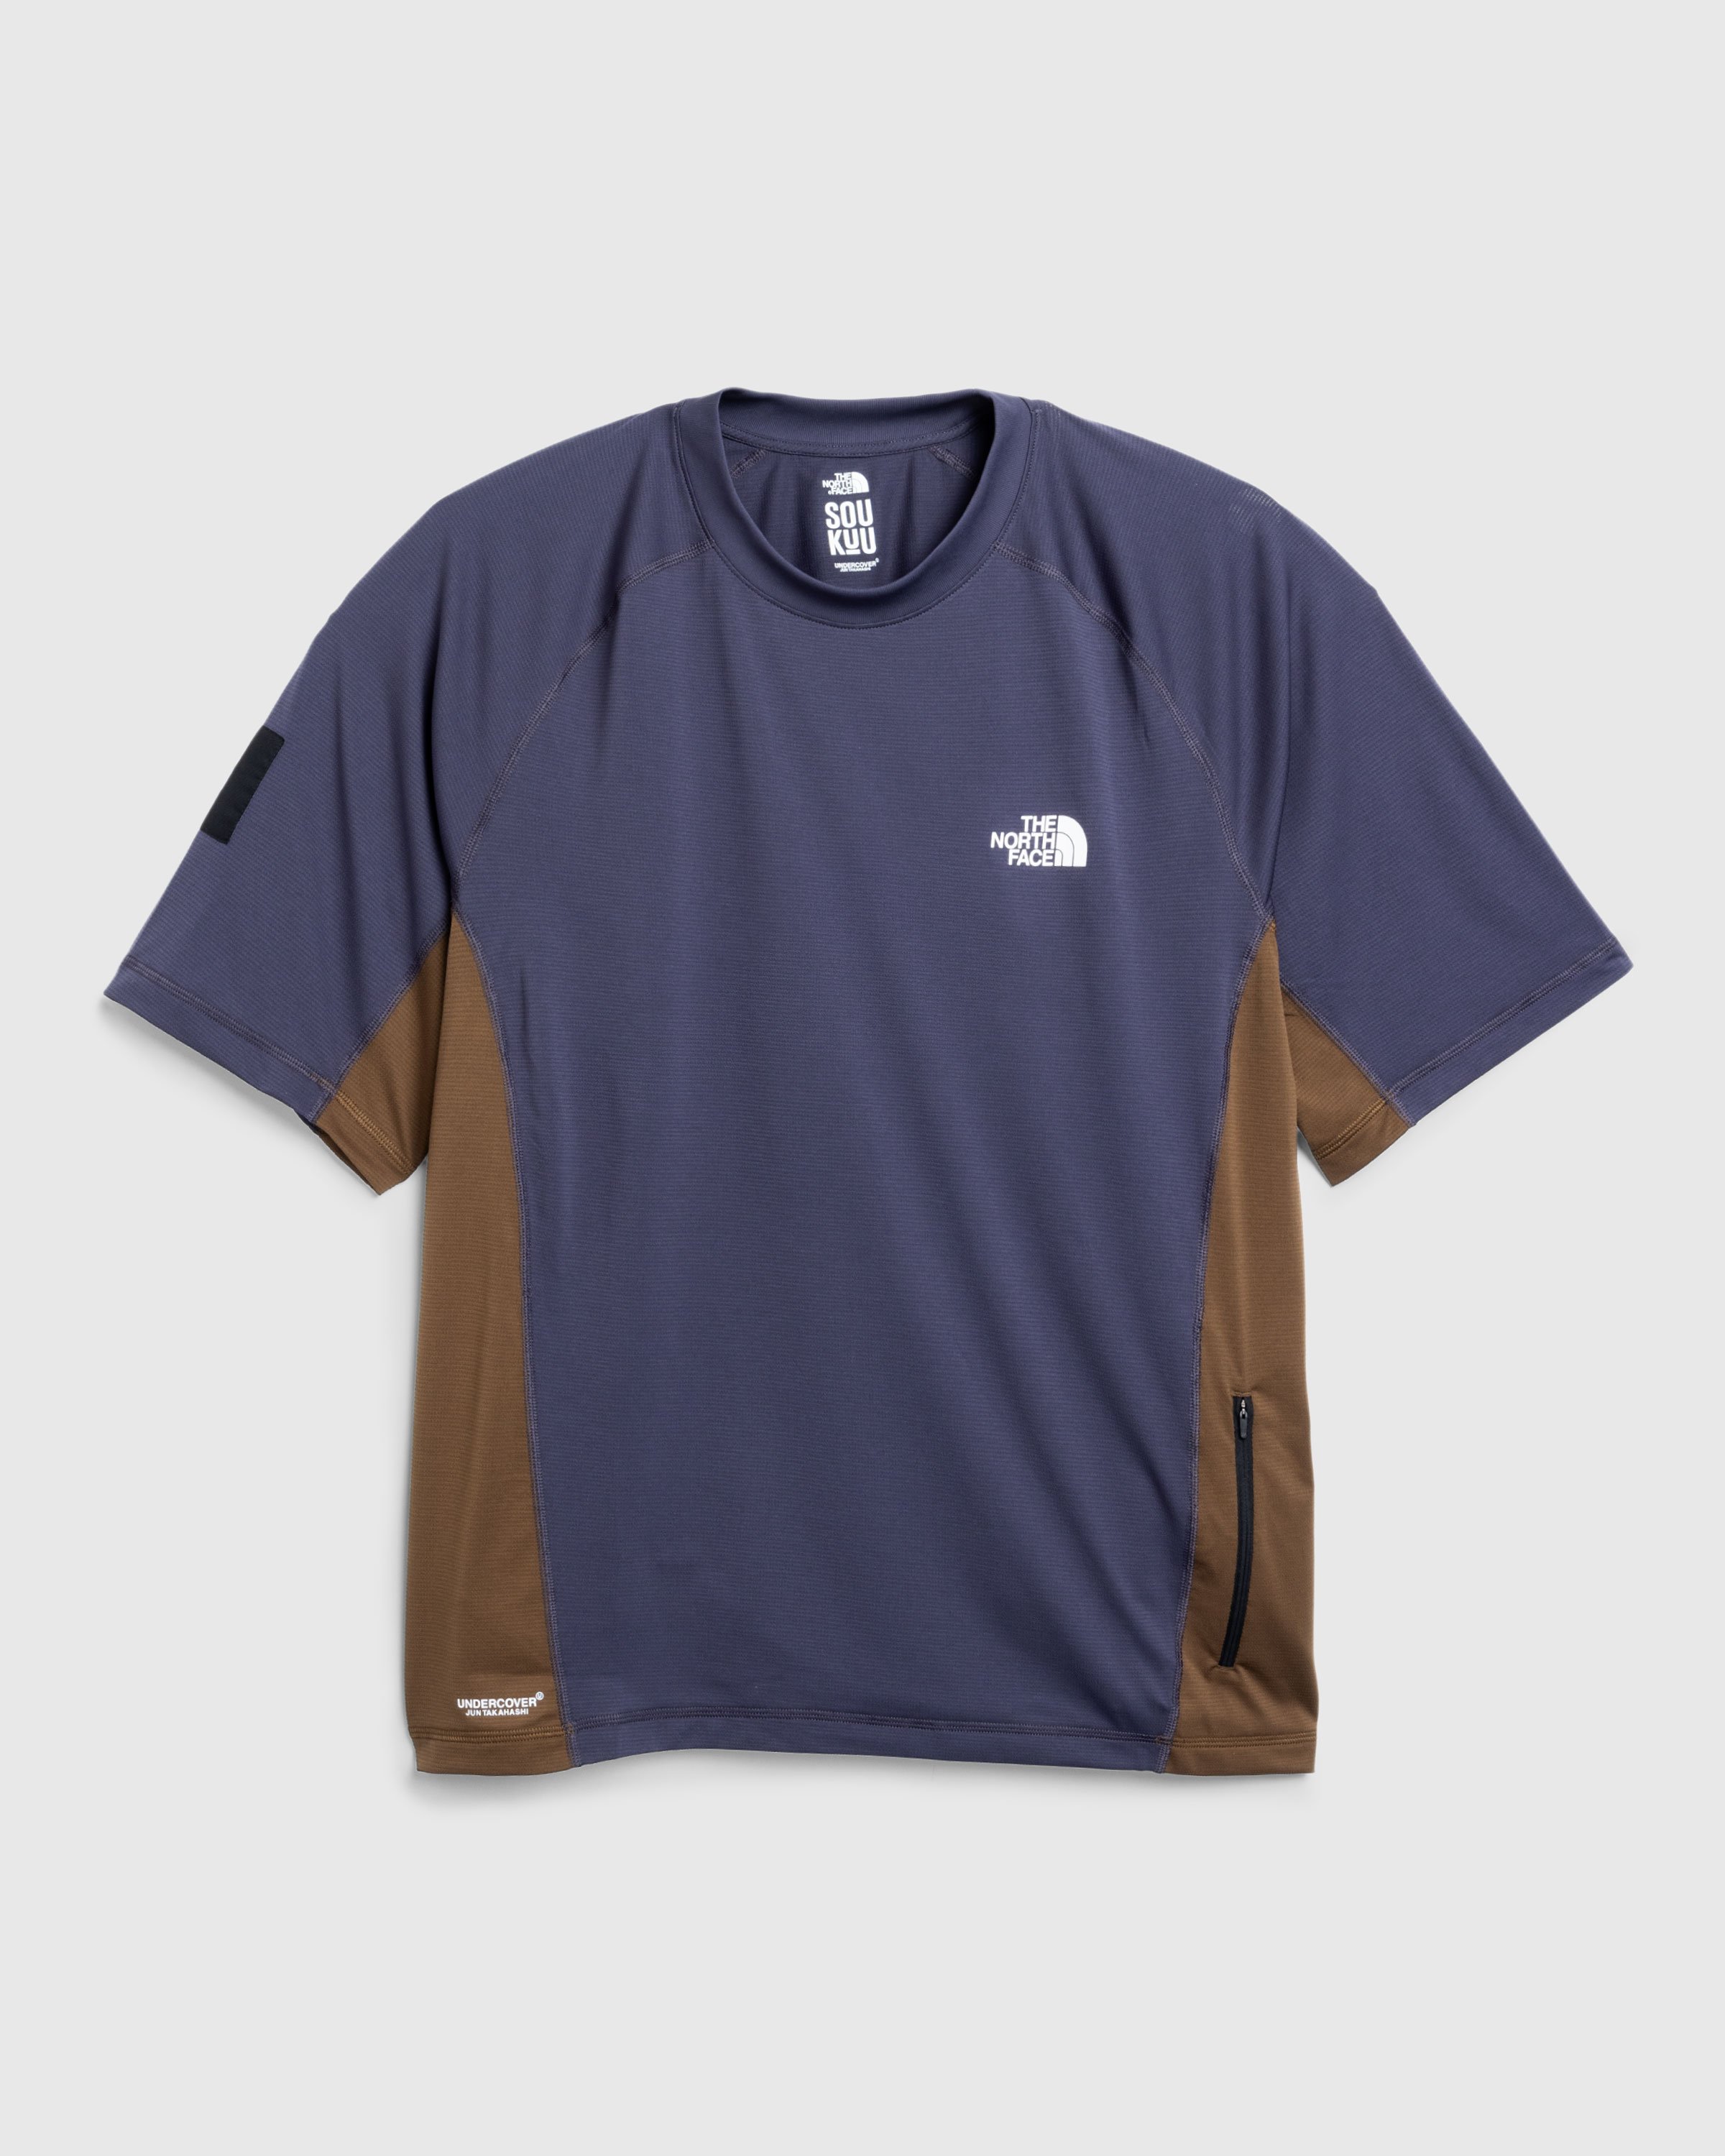 The North Face x UNDERCOVER - SOUKUU TRAIL RUN S/S TEE PERISCOPE GREY/DARK EAR - Clothing - Grey - Image 1